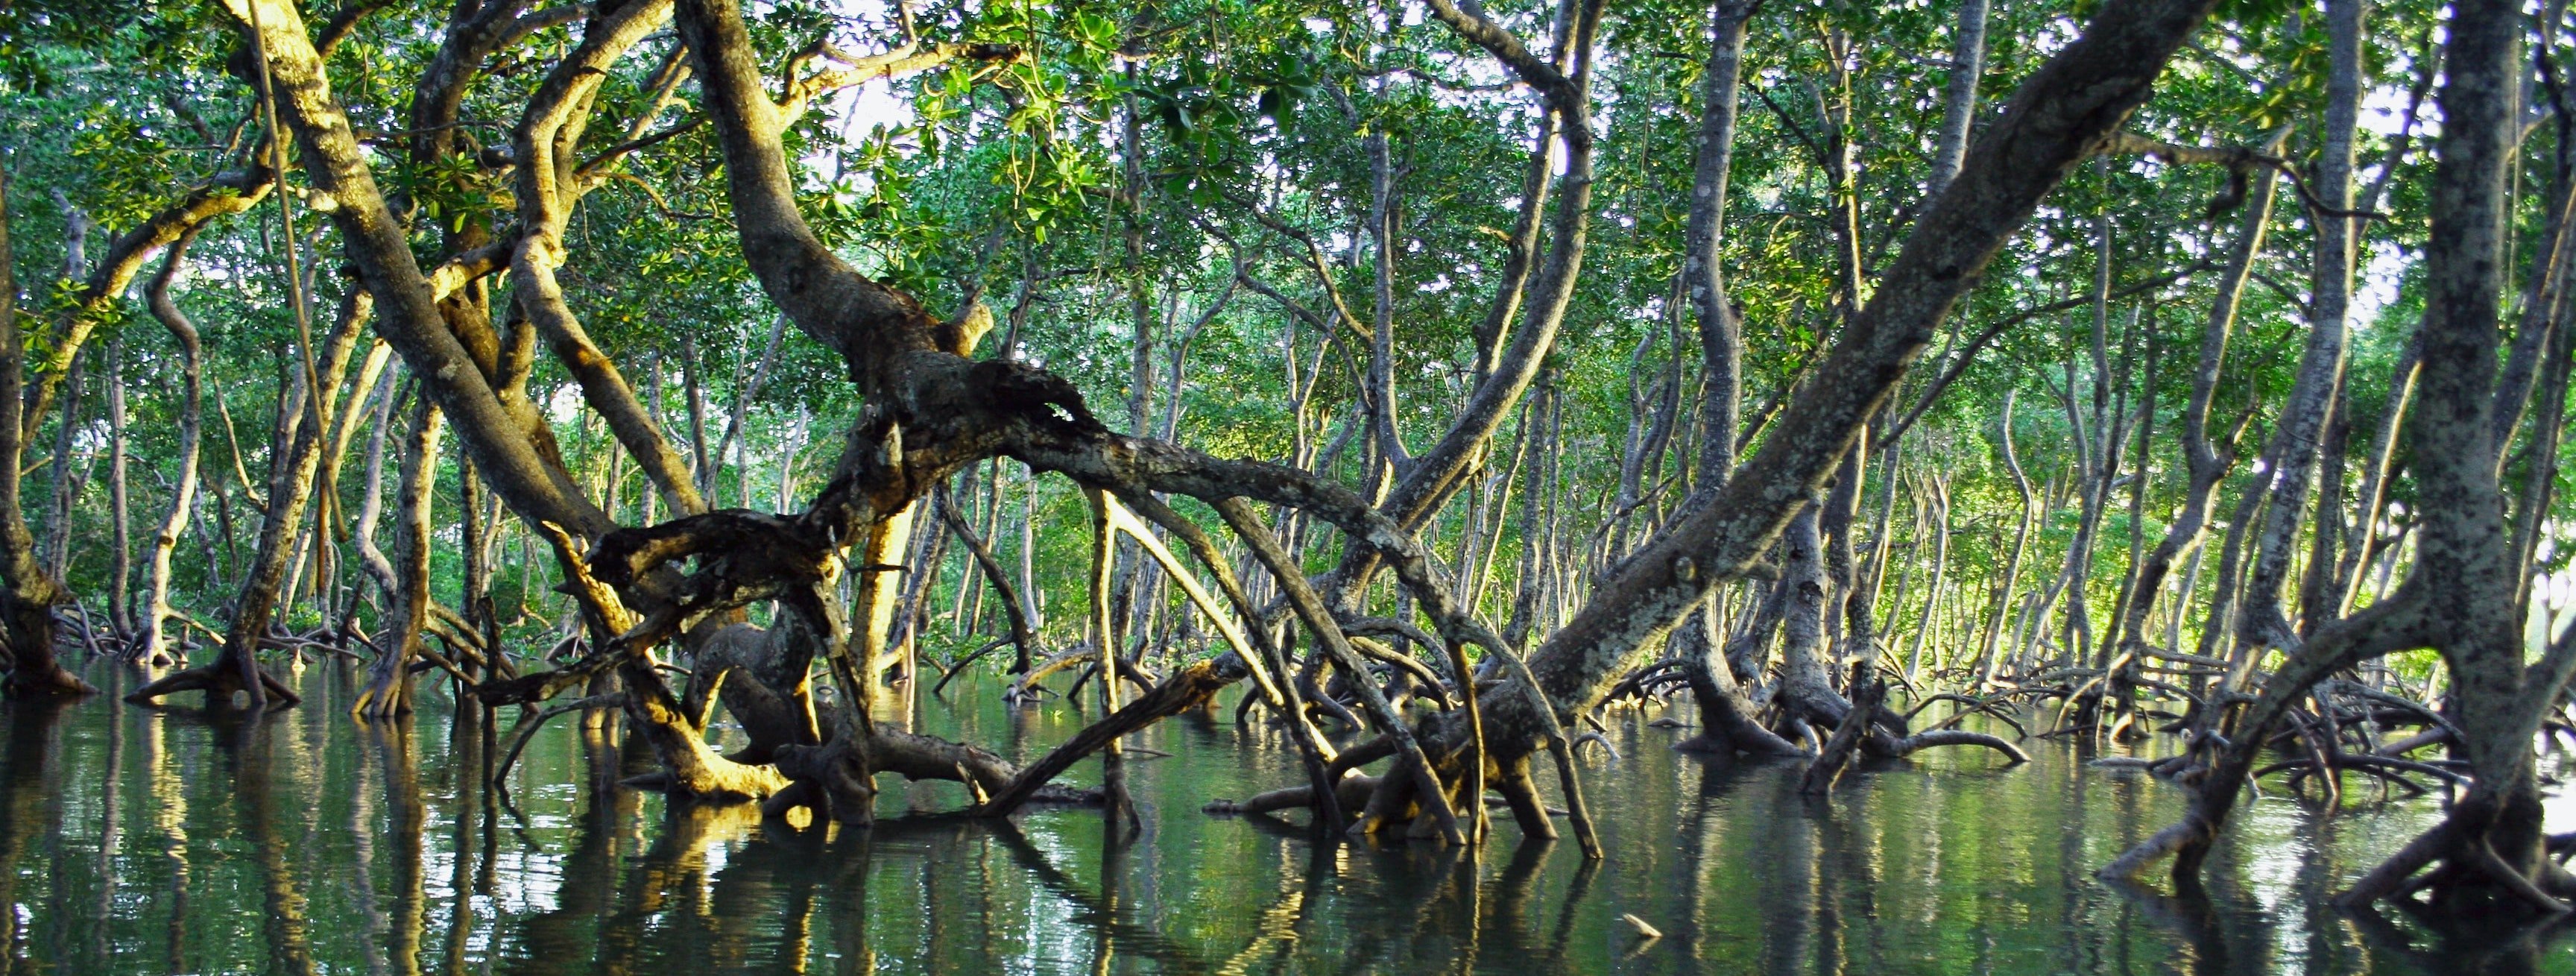 wide shot of mangrove forest